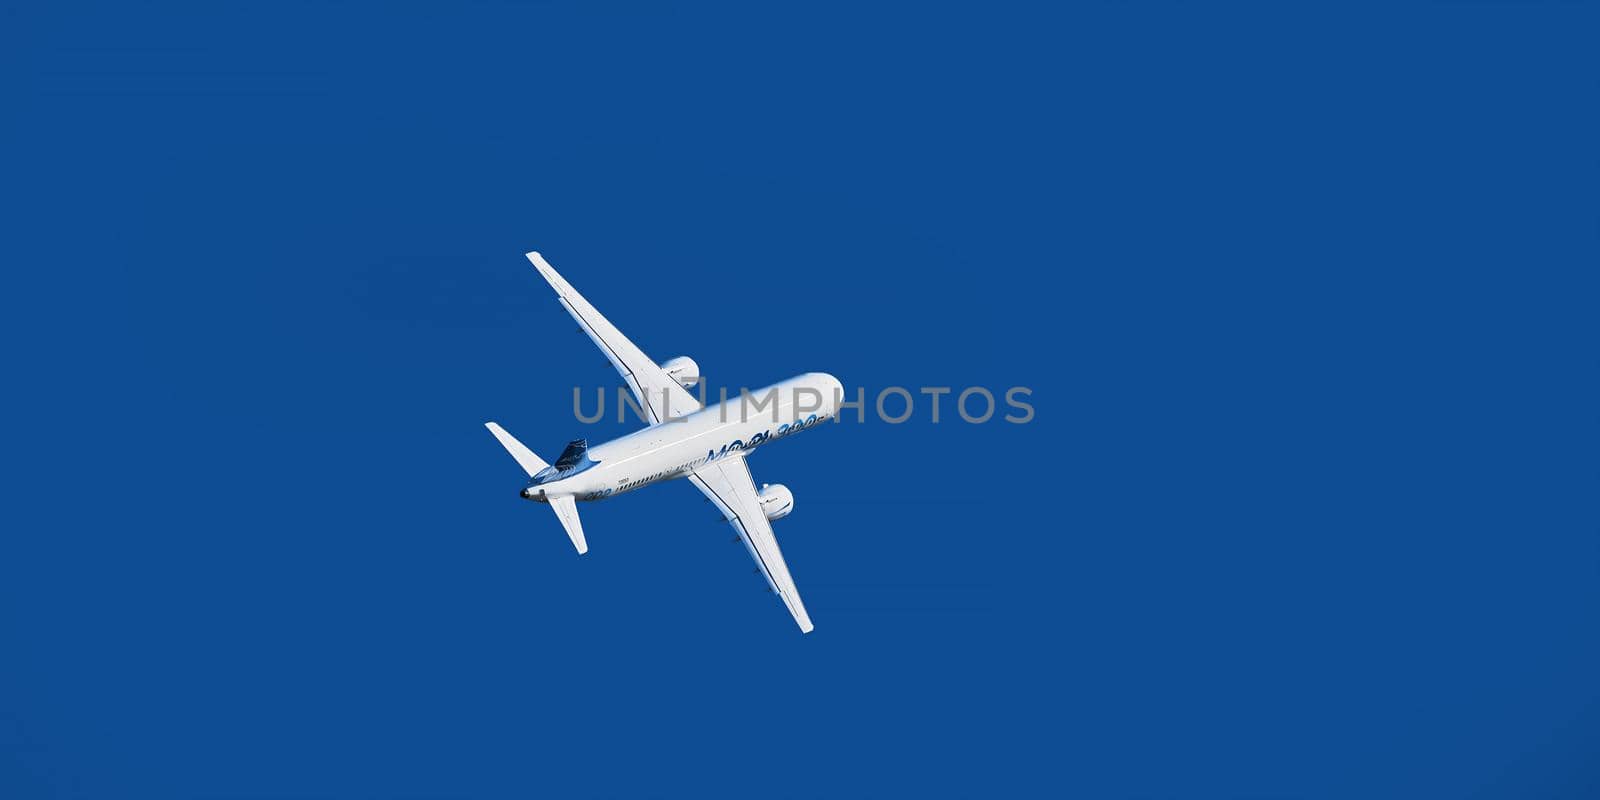 New Russian passenger aircraft MS-21-300 flying prototype of a new Russian civil airliner during test flights on MAKS 2019 airshow. ZHUKOVSKY, RUSSIA, AUGUST 29, 2019.